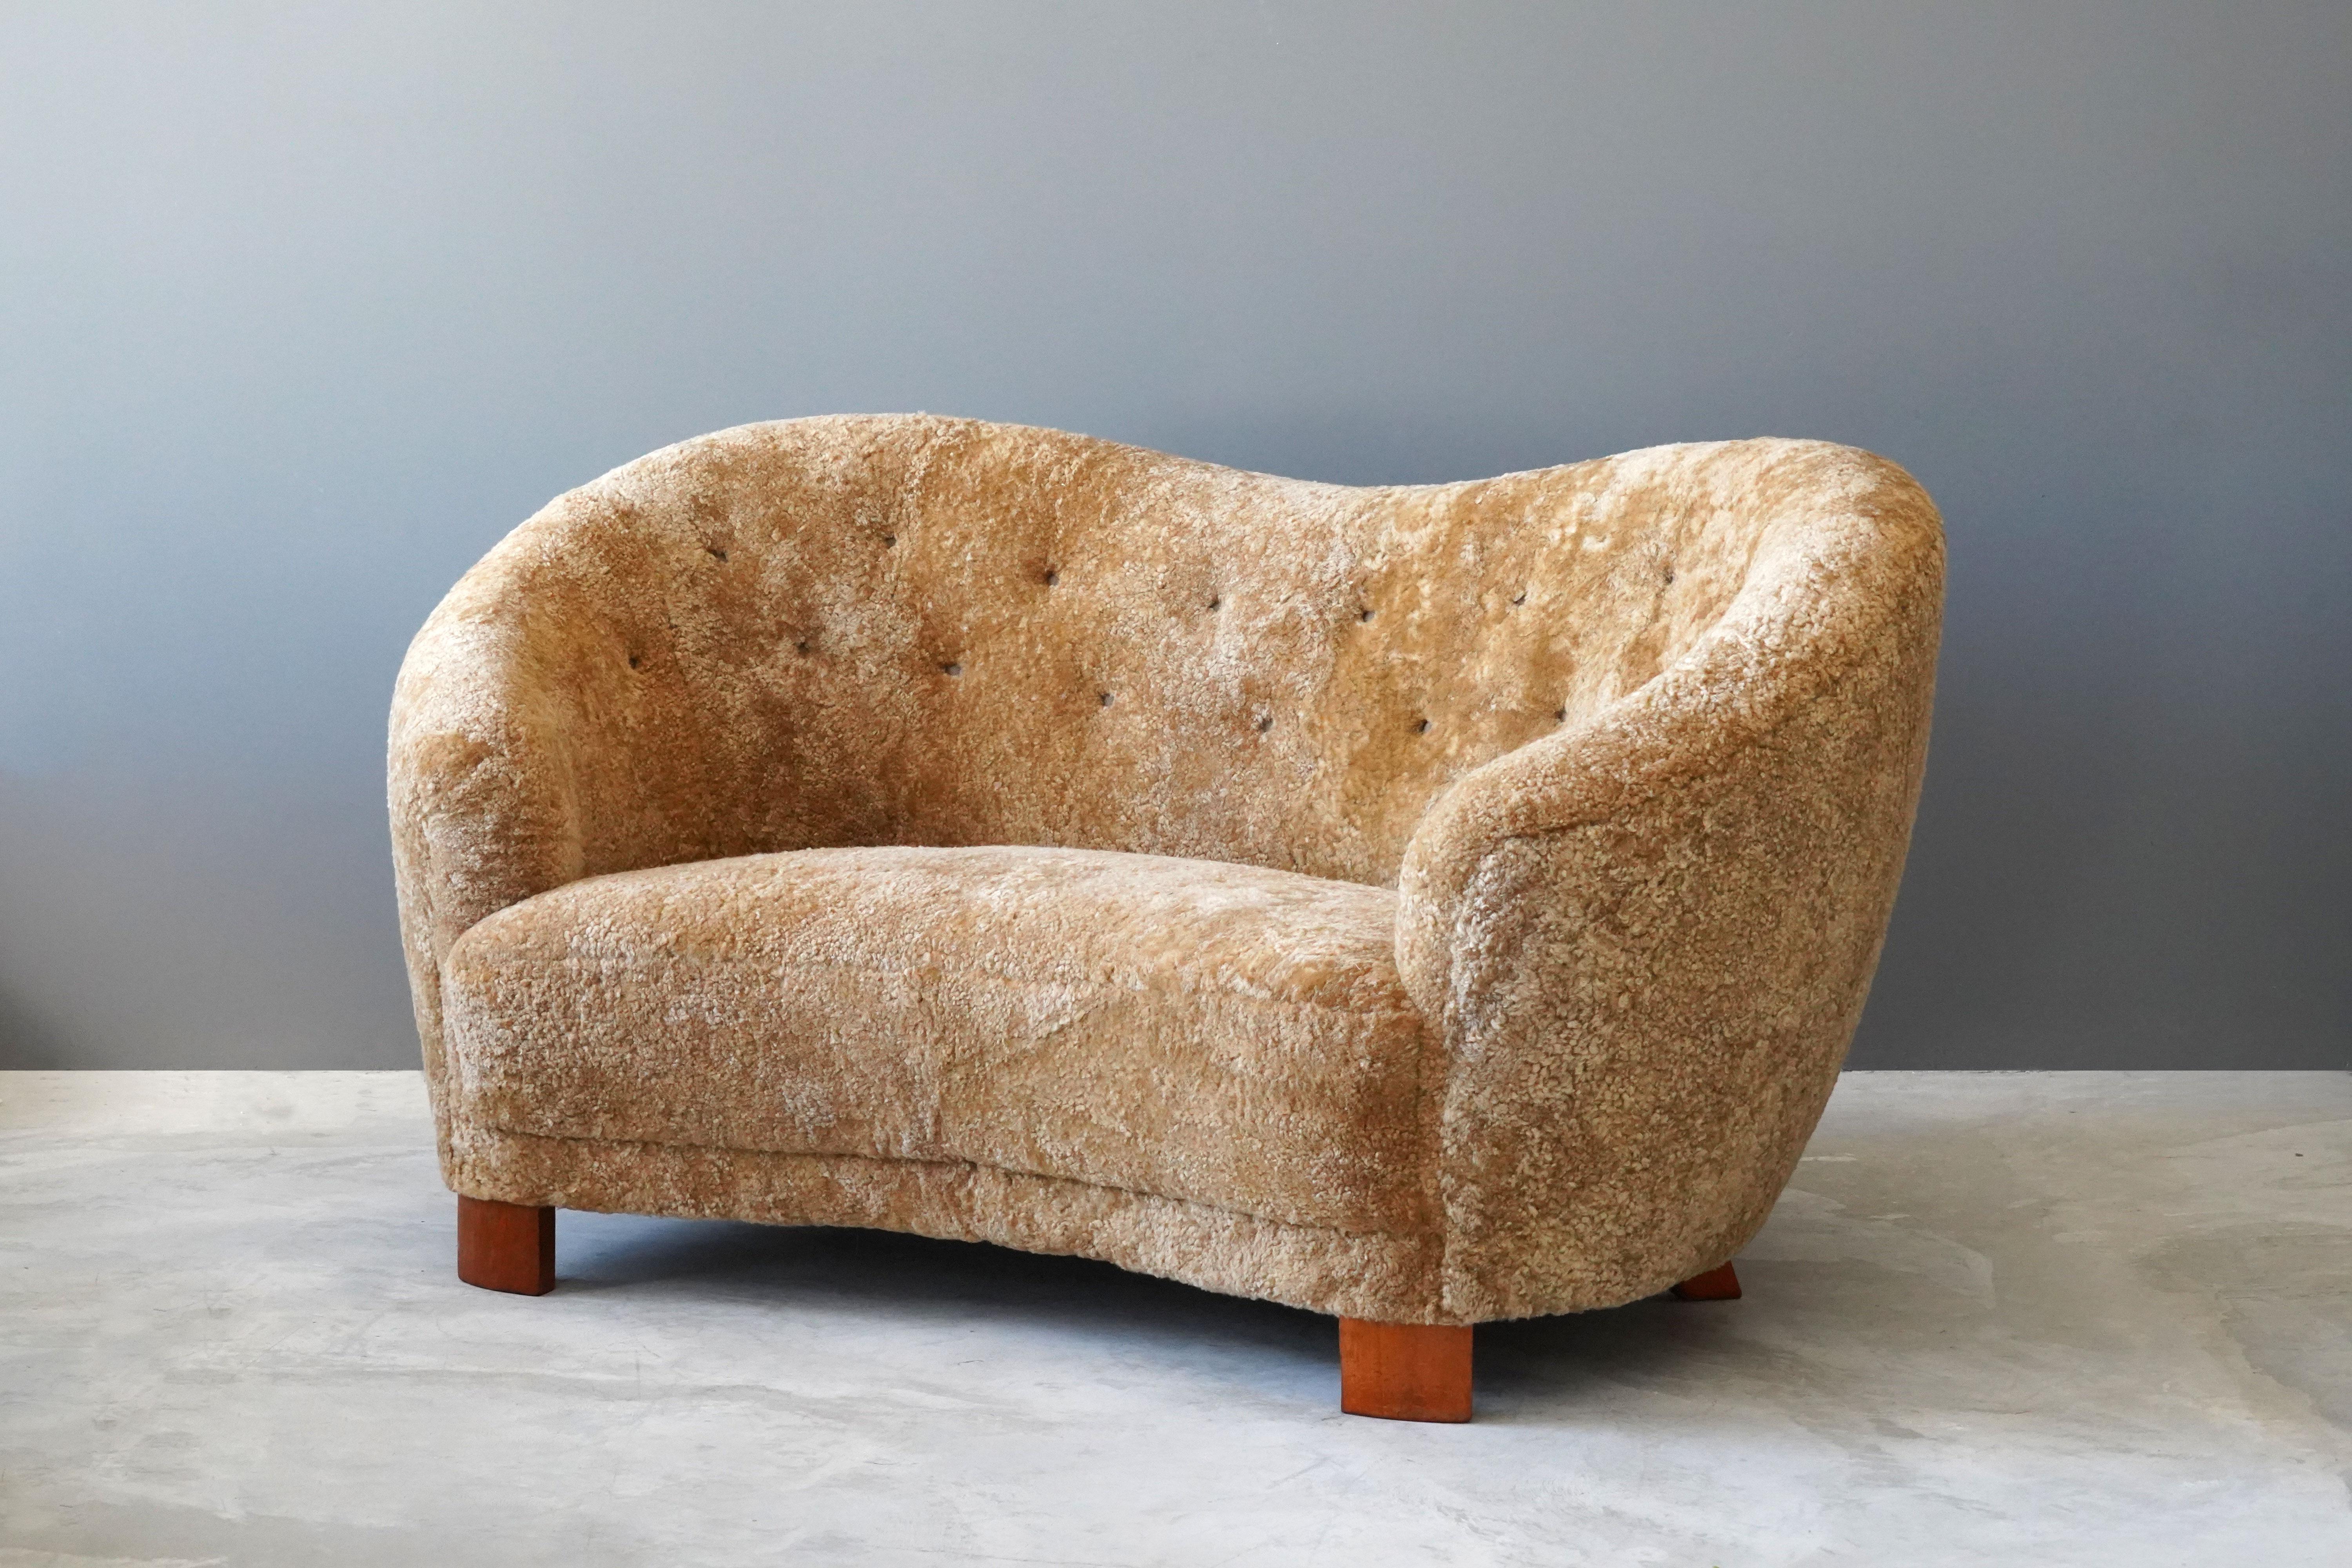 An organic modernist sofa / loveseat / settee. Produced in Denmark, 1940s. Reupholstered in brand new deep beige authentic sheepskin / shearling. 

Shares it's origin and organic style with works by designers such as Viggo Boesen, Flemming Lassen,